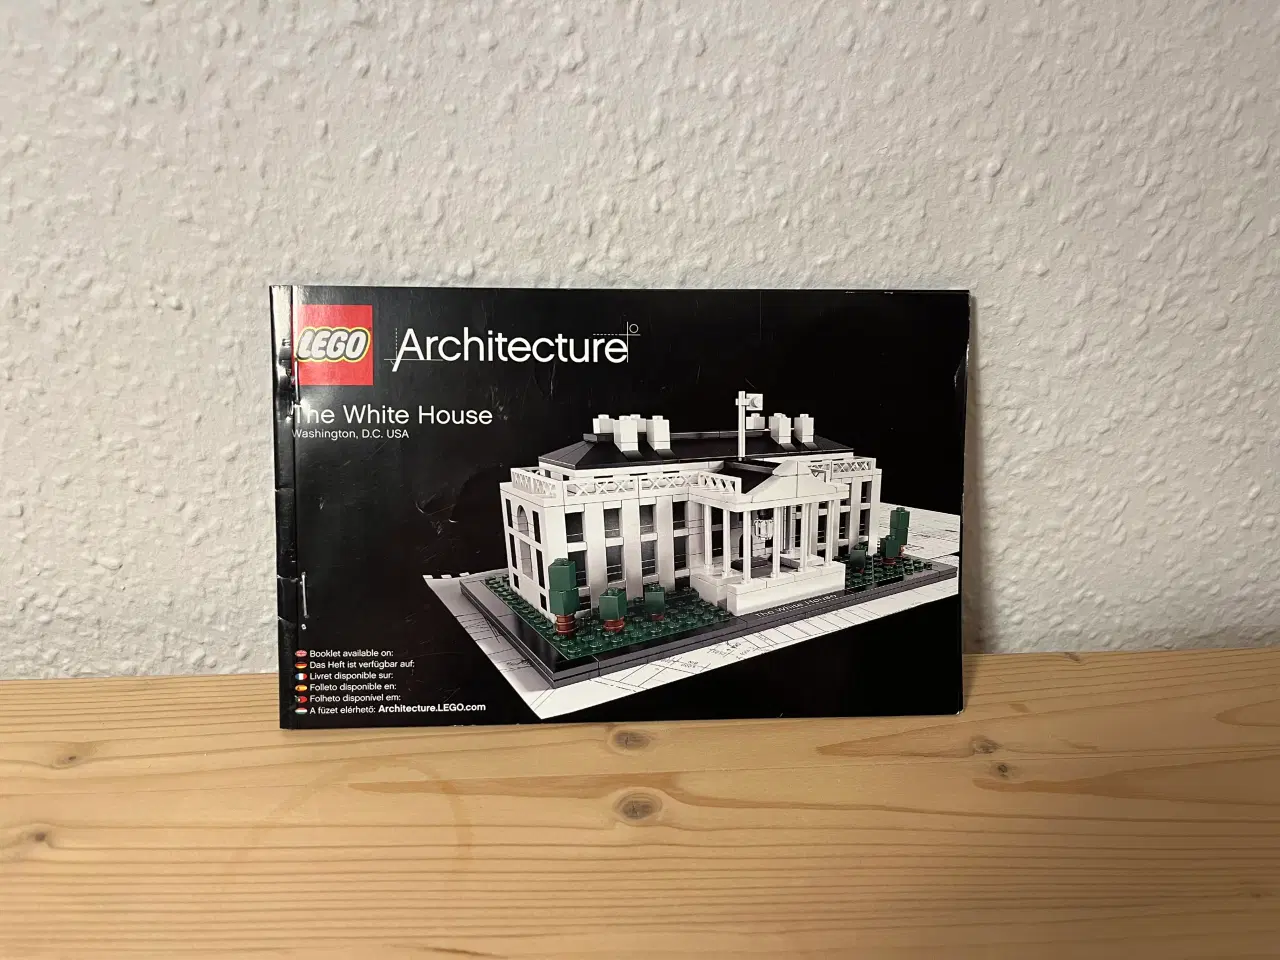 Billede 5 - Lego architecture - The White House // 21006